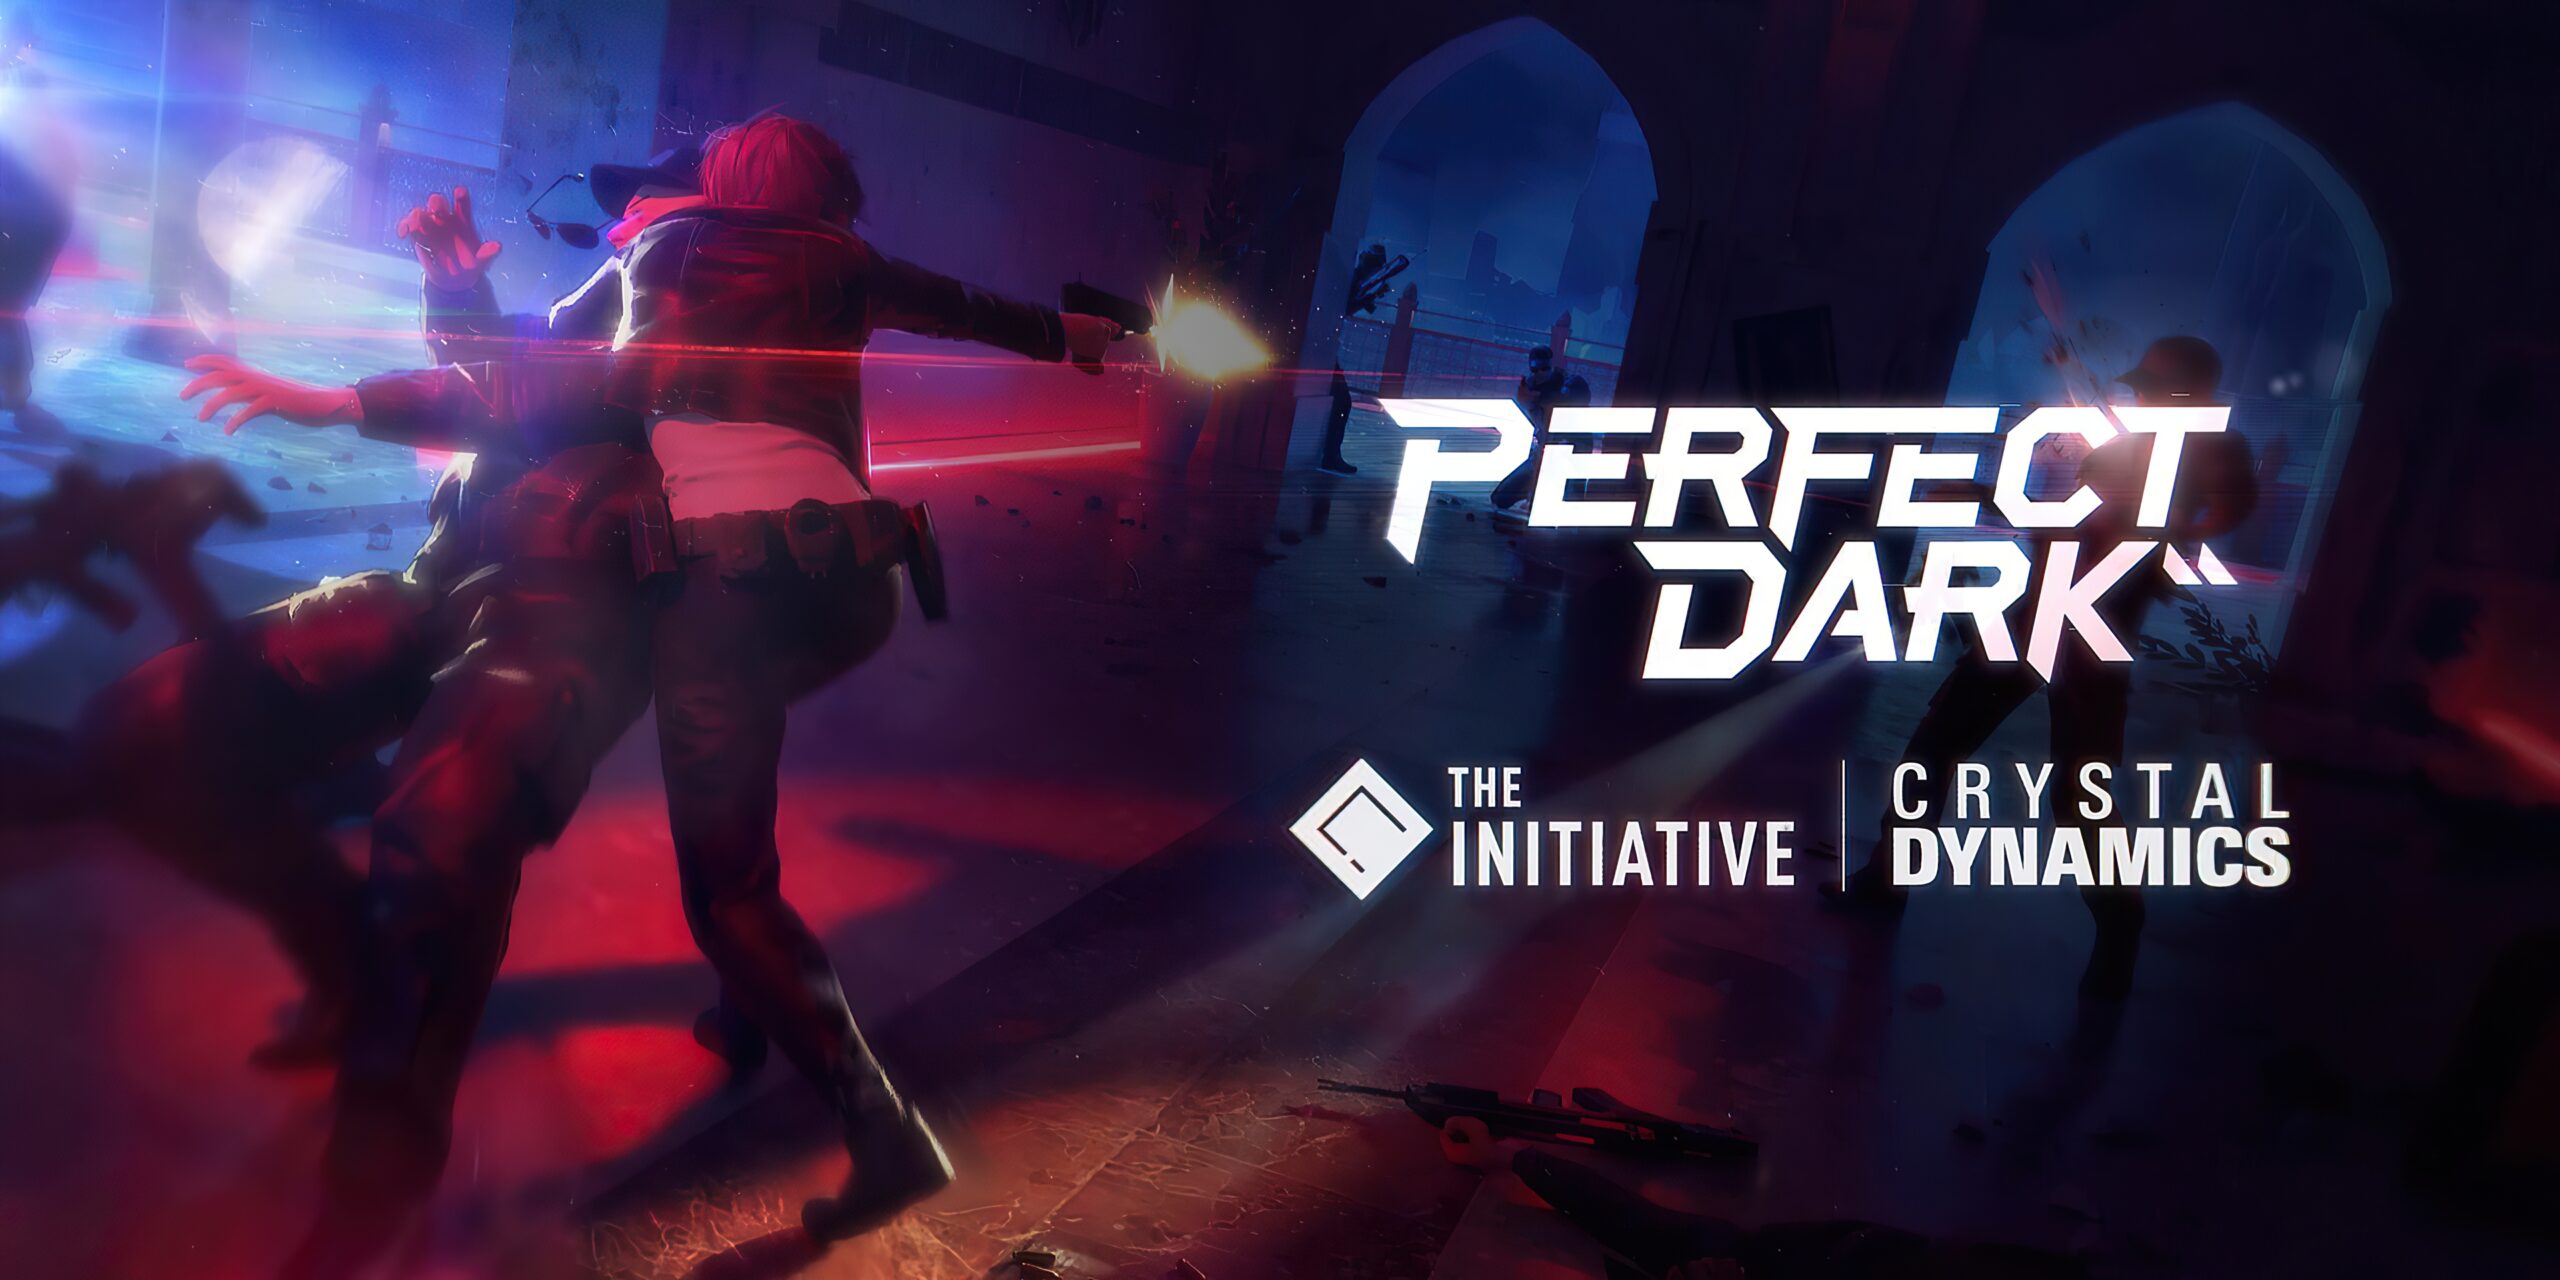 Perfect Dark is an FPS That Blends Combat, Espionage, and Gadgets – Rumour